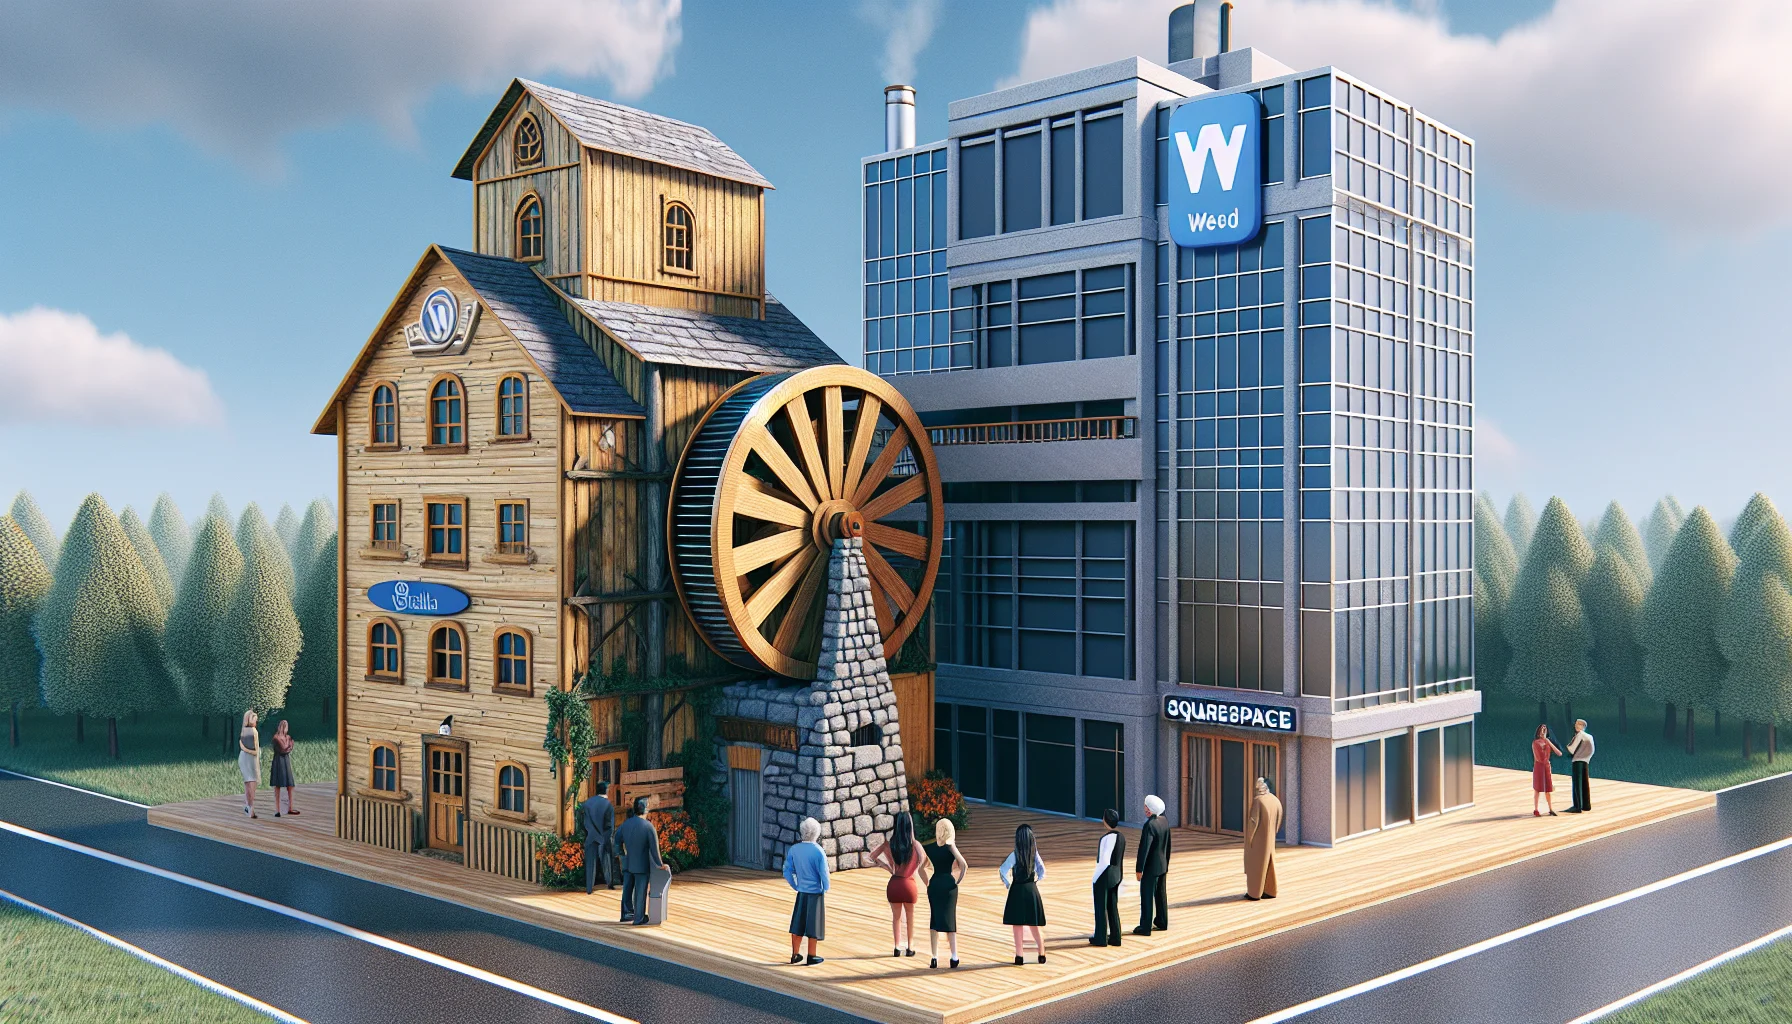 Create an entertaining and evocative scenario illustrating the humorous side of web hosting. In this image, two digital spaces - represented as physical buildings. The 'WordPress building' is a charming, rustic mill with a waterwheel, demonstrating its versatility and customizability. The 'Squarespace building' is a sleek, modern skyscraper, showcasing how streamlined and user-friendly it is. However, both buildings are humorously engaging in a friendly competition to entice customers, symbolized by people of different ages, genders, and descents - Hispanic woman, Middle-Eastern man, Black teenager, and an elderly Caucasian man - who are looking with amusement and curiosity at these two 'competing' buildings.